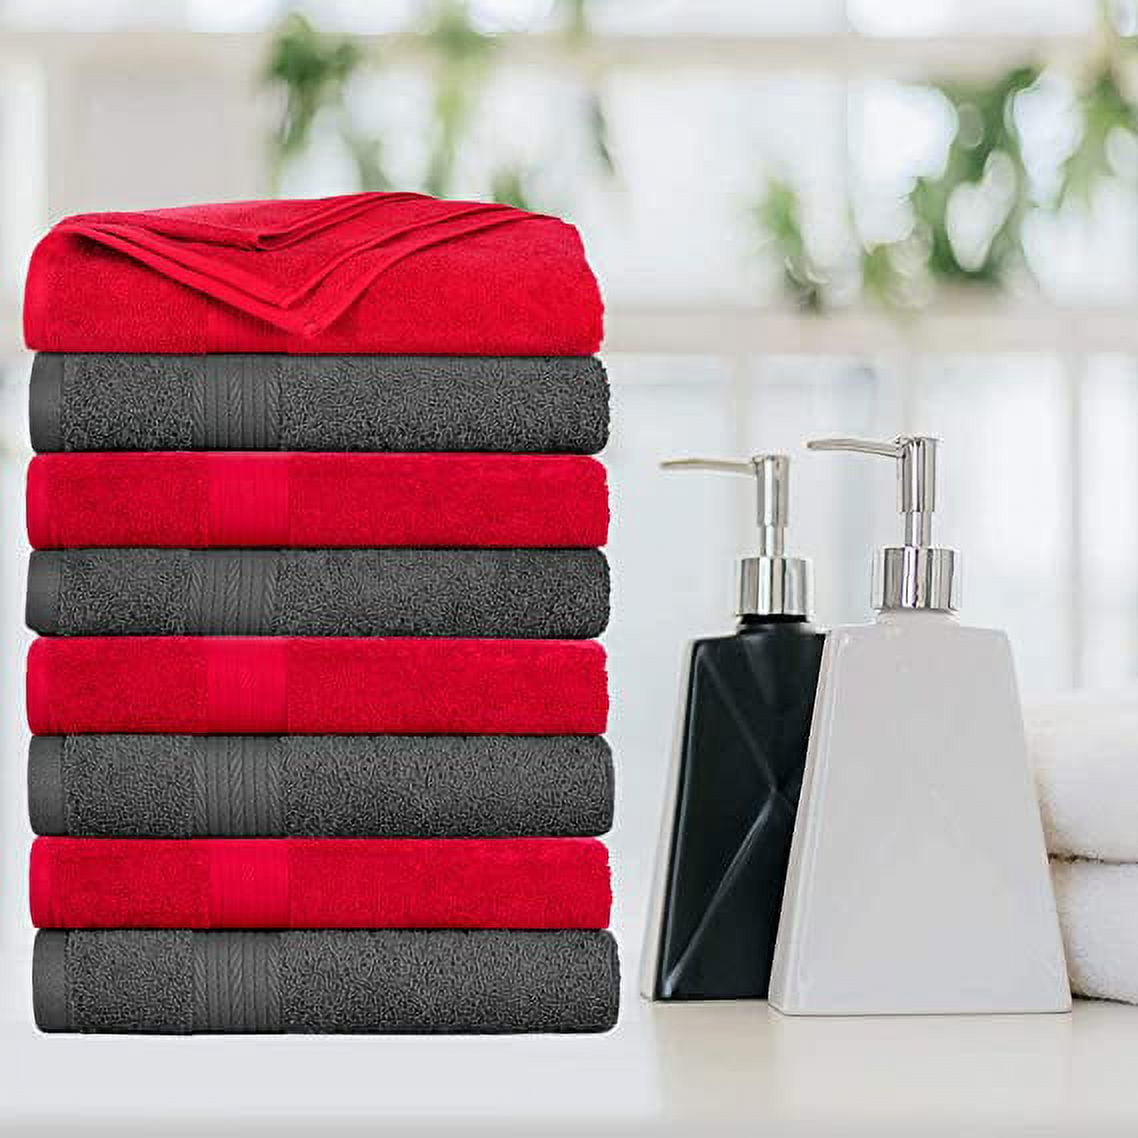 Christmas Decor Luxury Medium Red Bath Towels Pack of 6 for Bathroom 24 x 48 inch Cotton, Adult Unisex